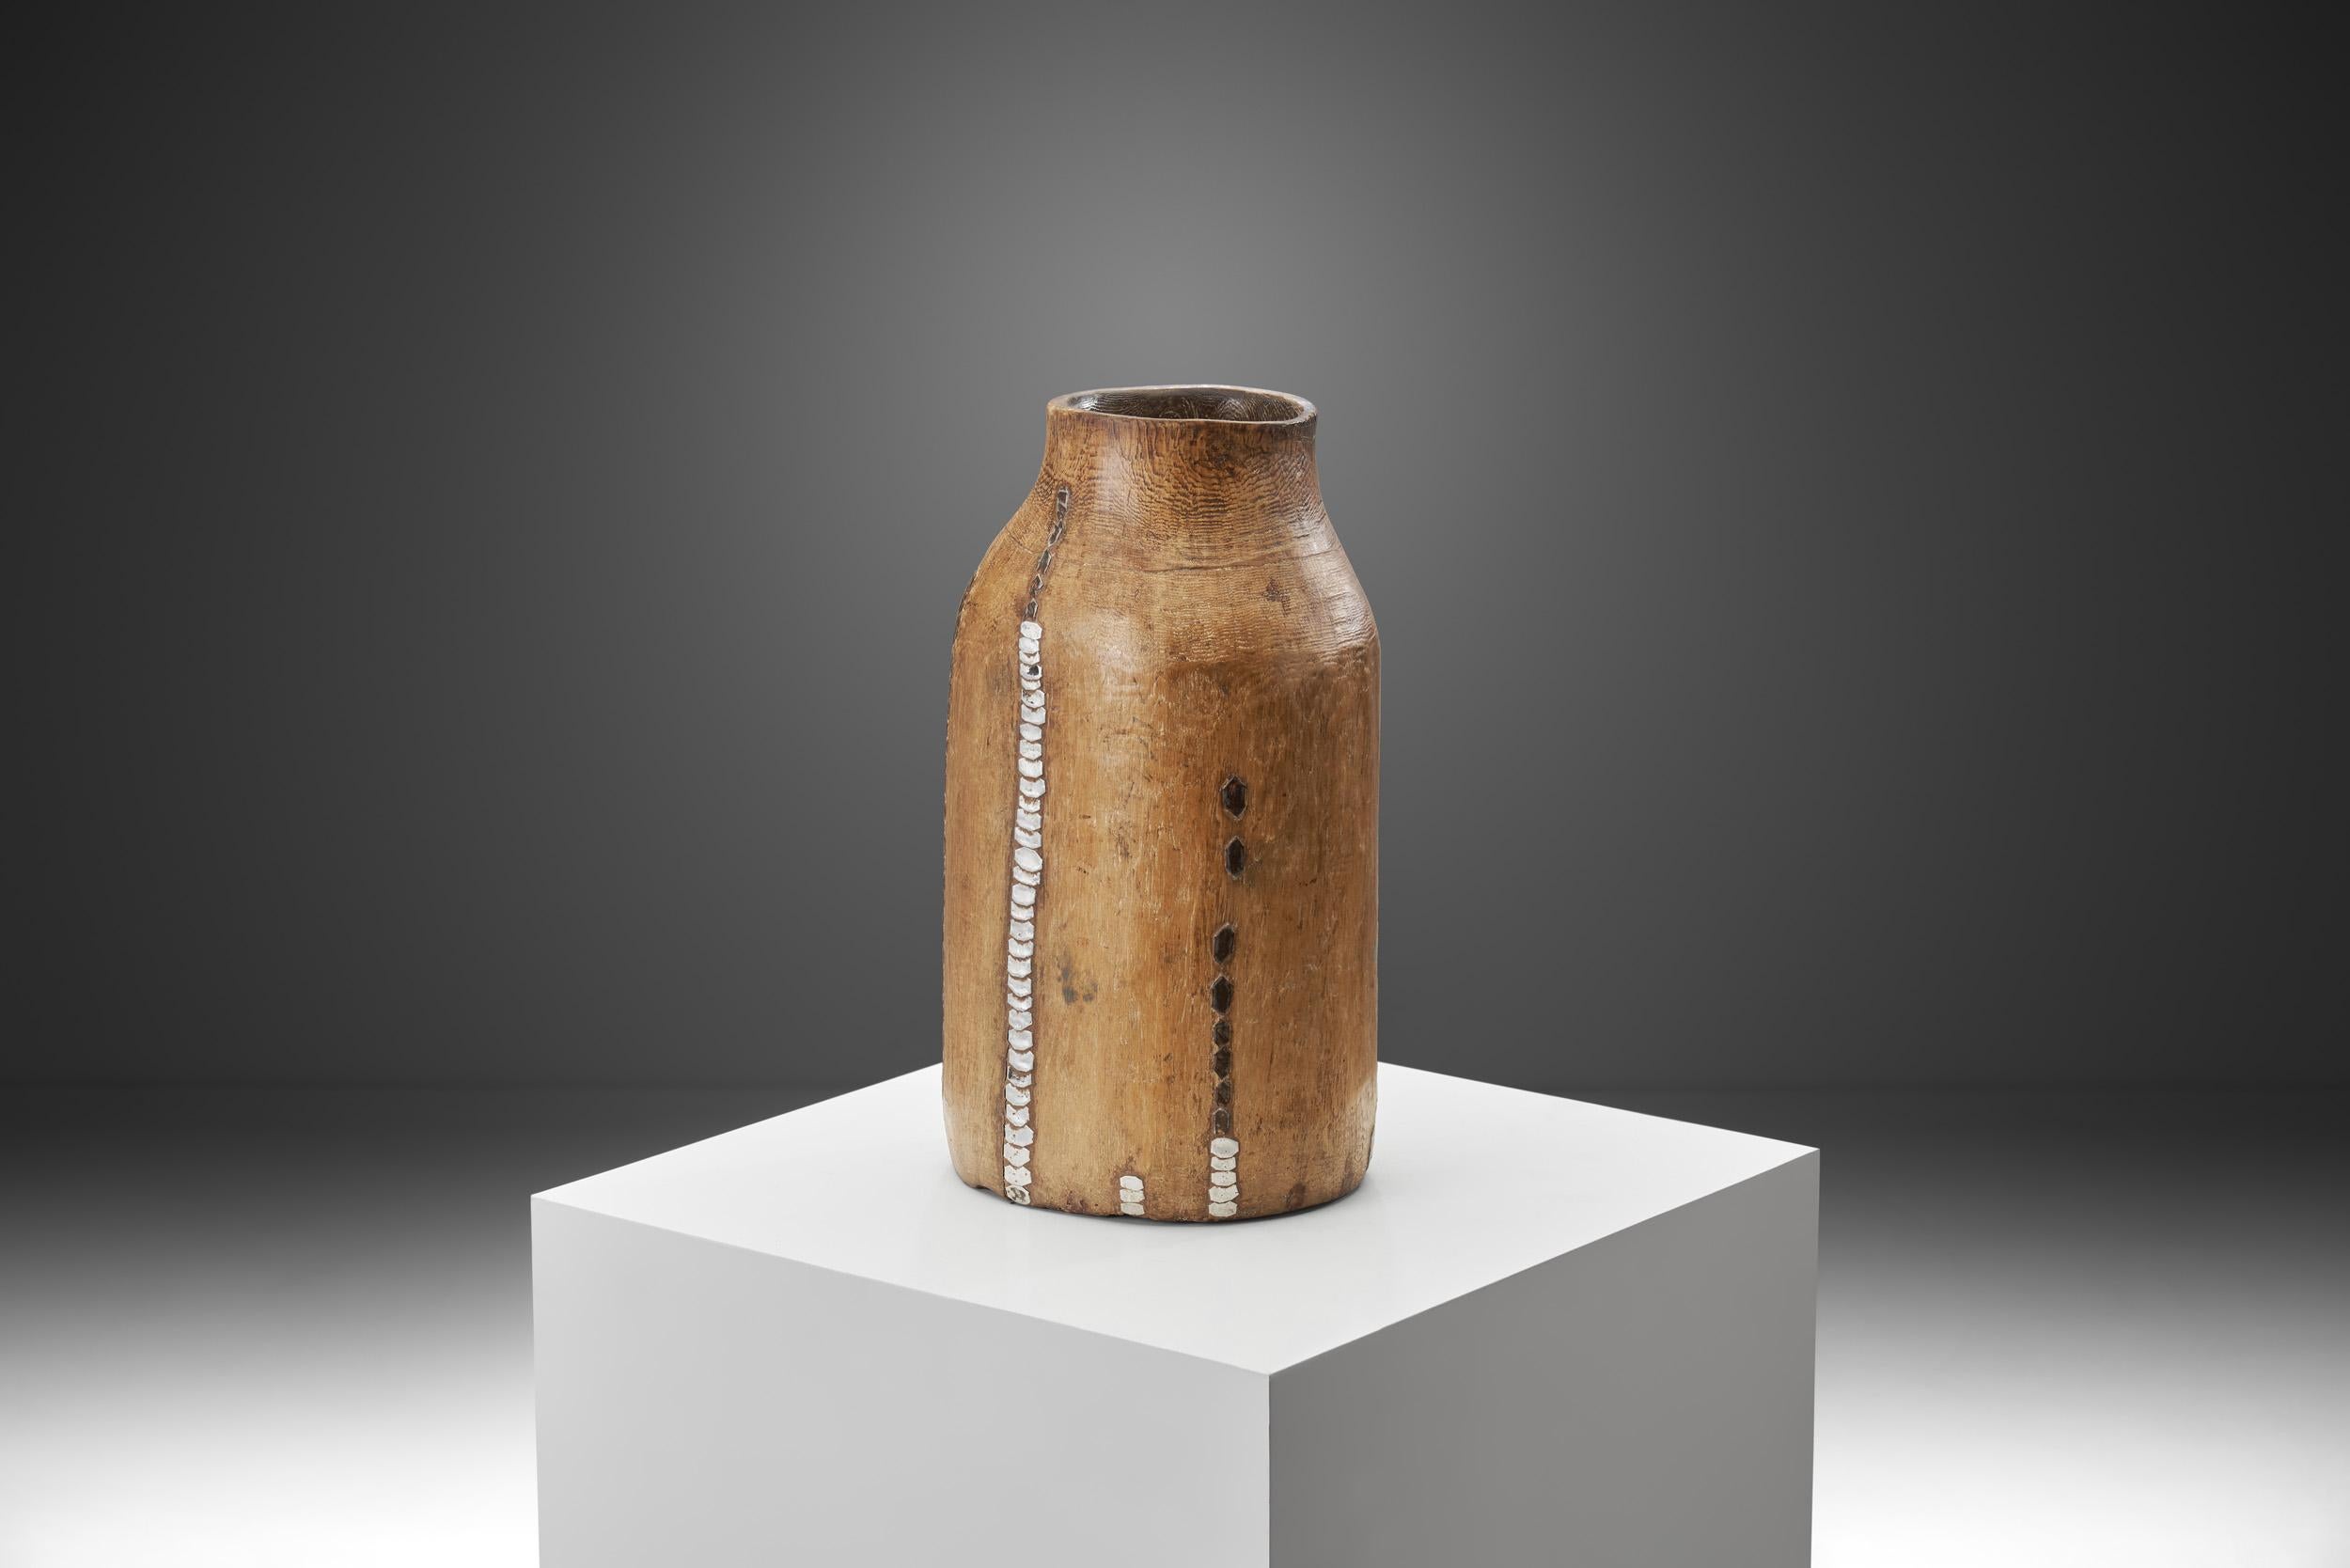 This authentic wood milk container from Rwanda can be traced to the Tutsi people, an ethnic group of the African Great Lakes region. From the 15th century, cattle and the arts - among many other things - had an important role in Tutsi culture,